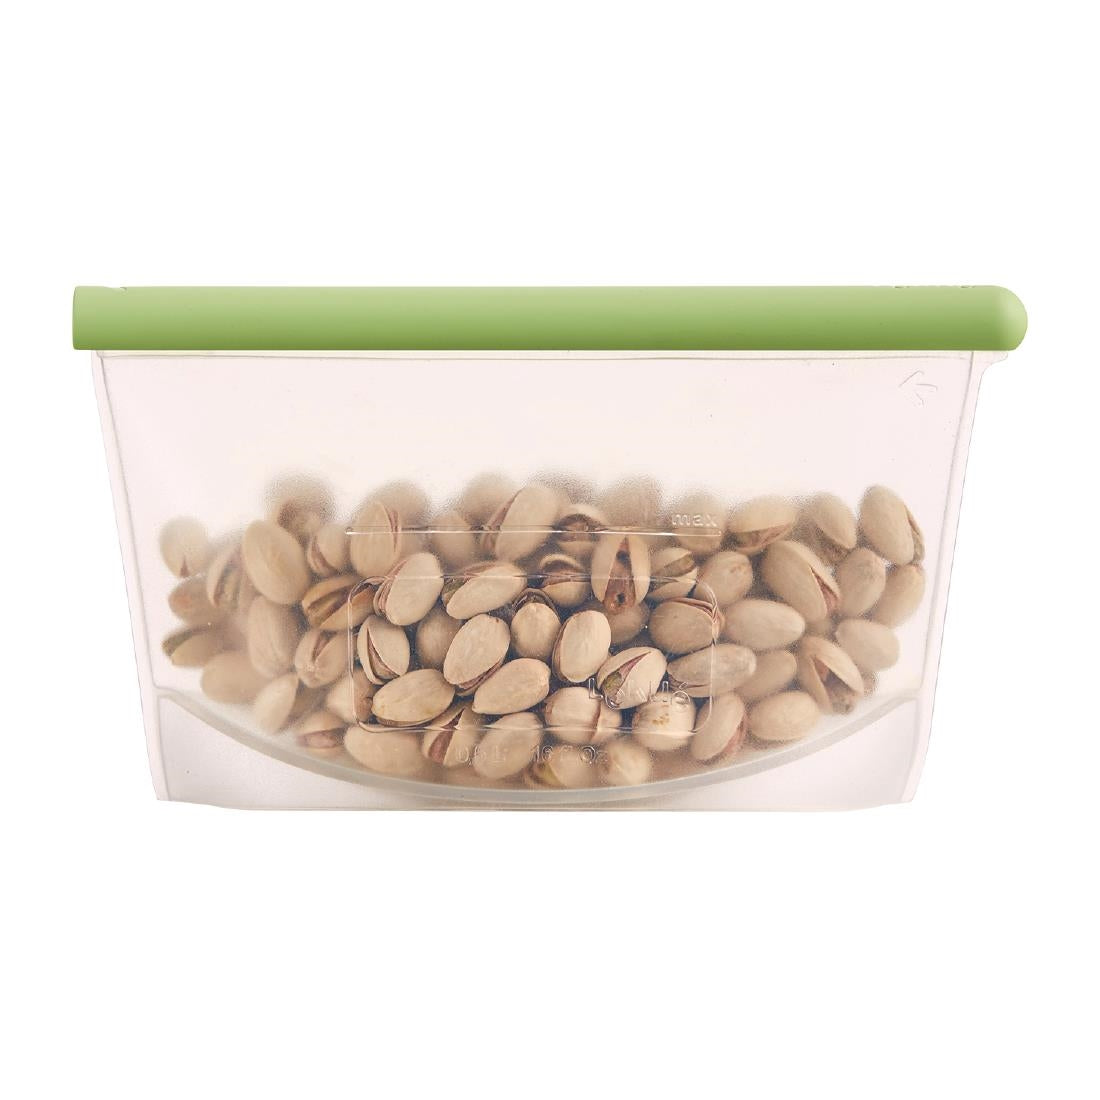 FS287 Lekue Reusable Silicone Food Storage Bag 500ml JD Catering Equipment Solutions Ltd